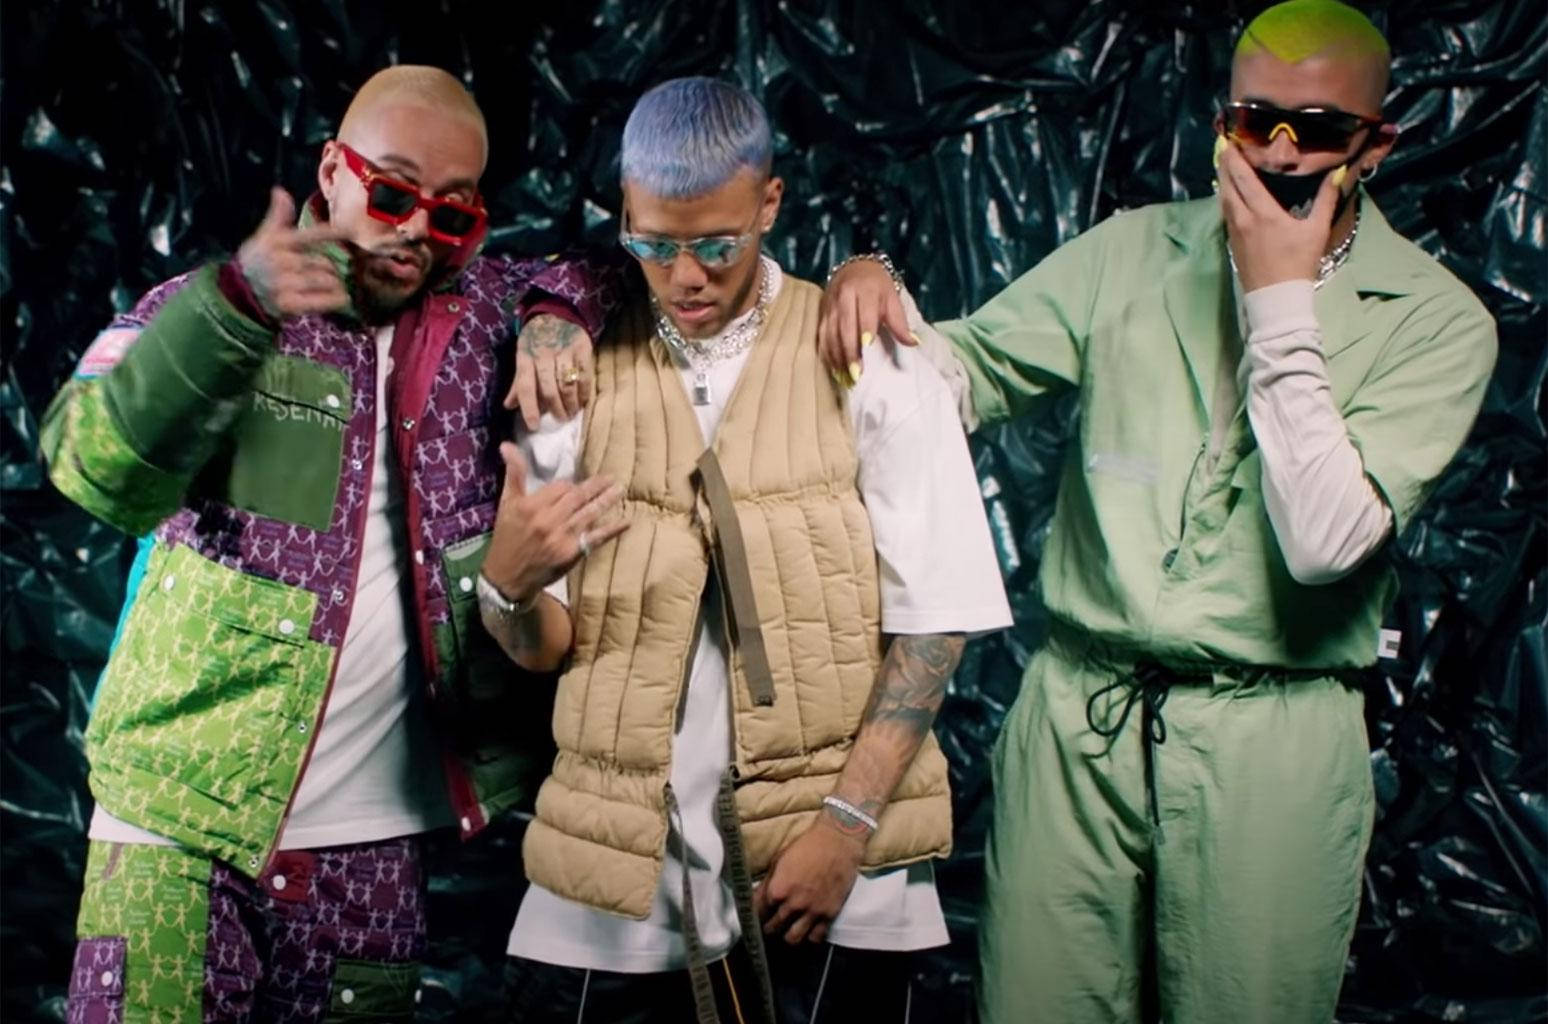 Jhay Cortez, J Balvin, And Bad Bunny Posing Together For A Photoshoot Background